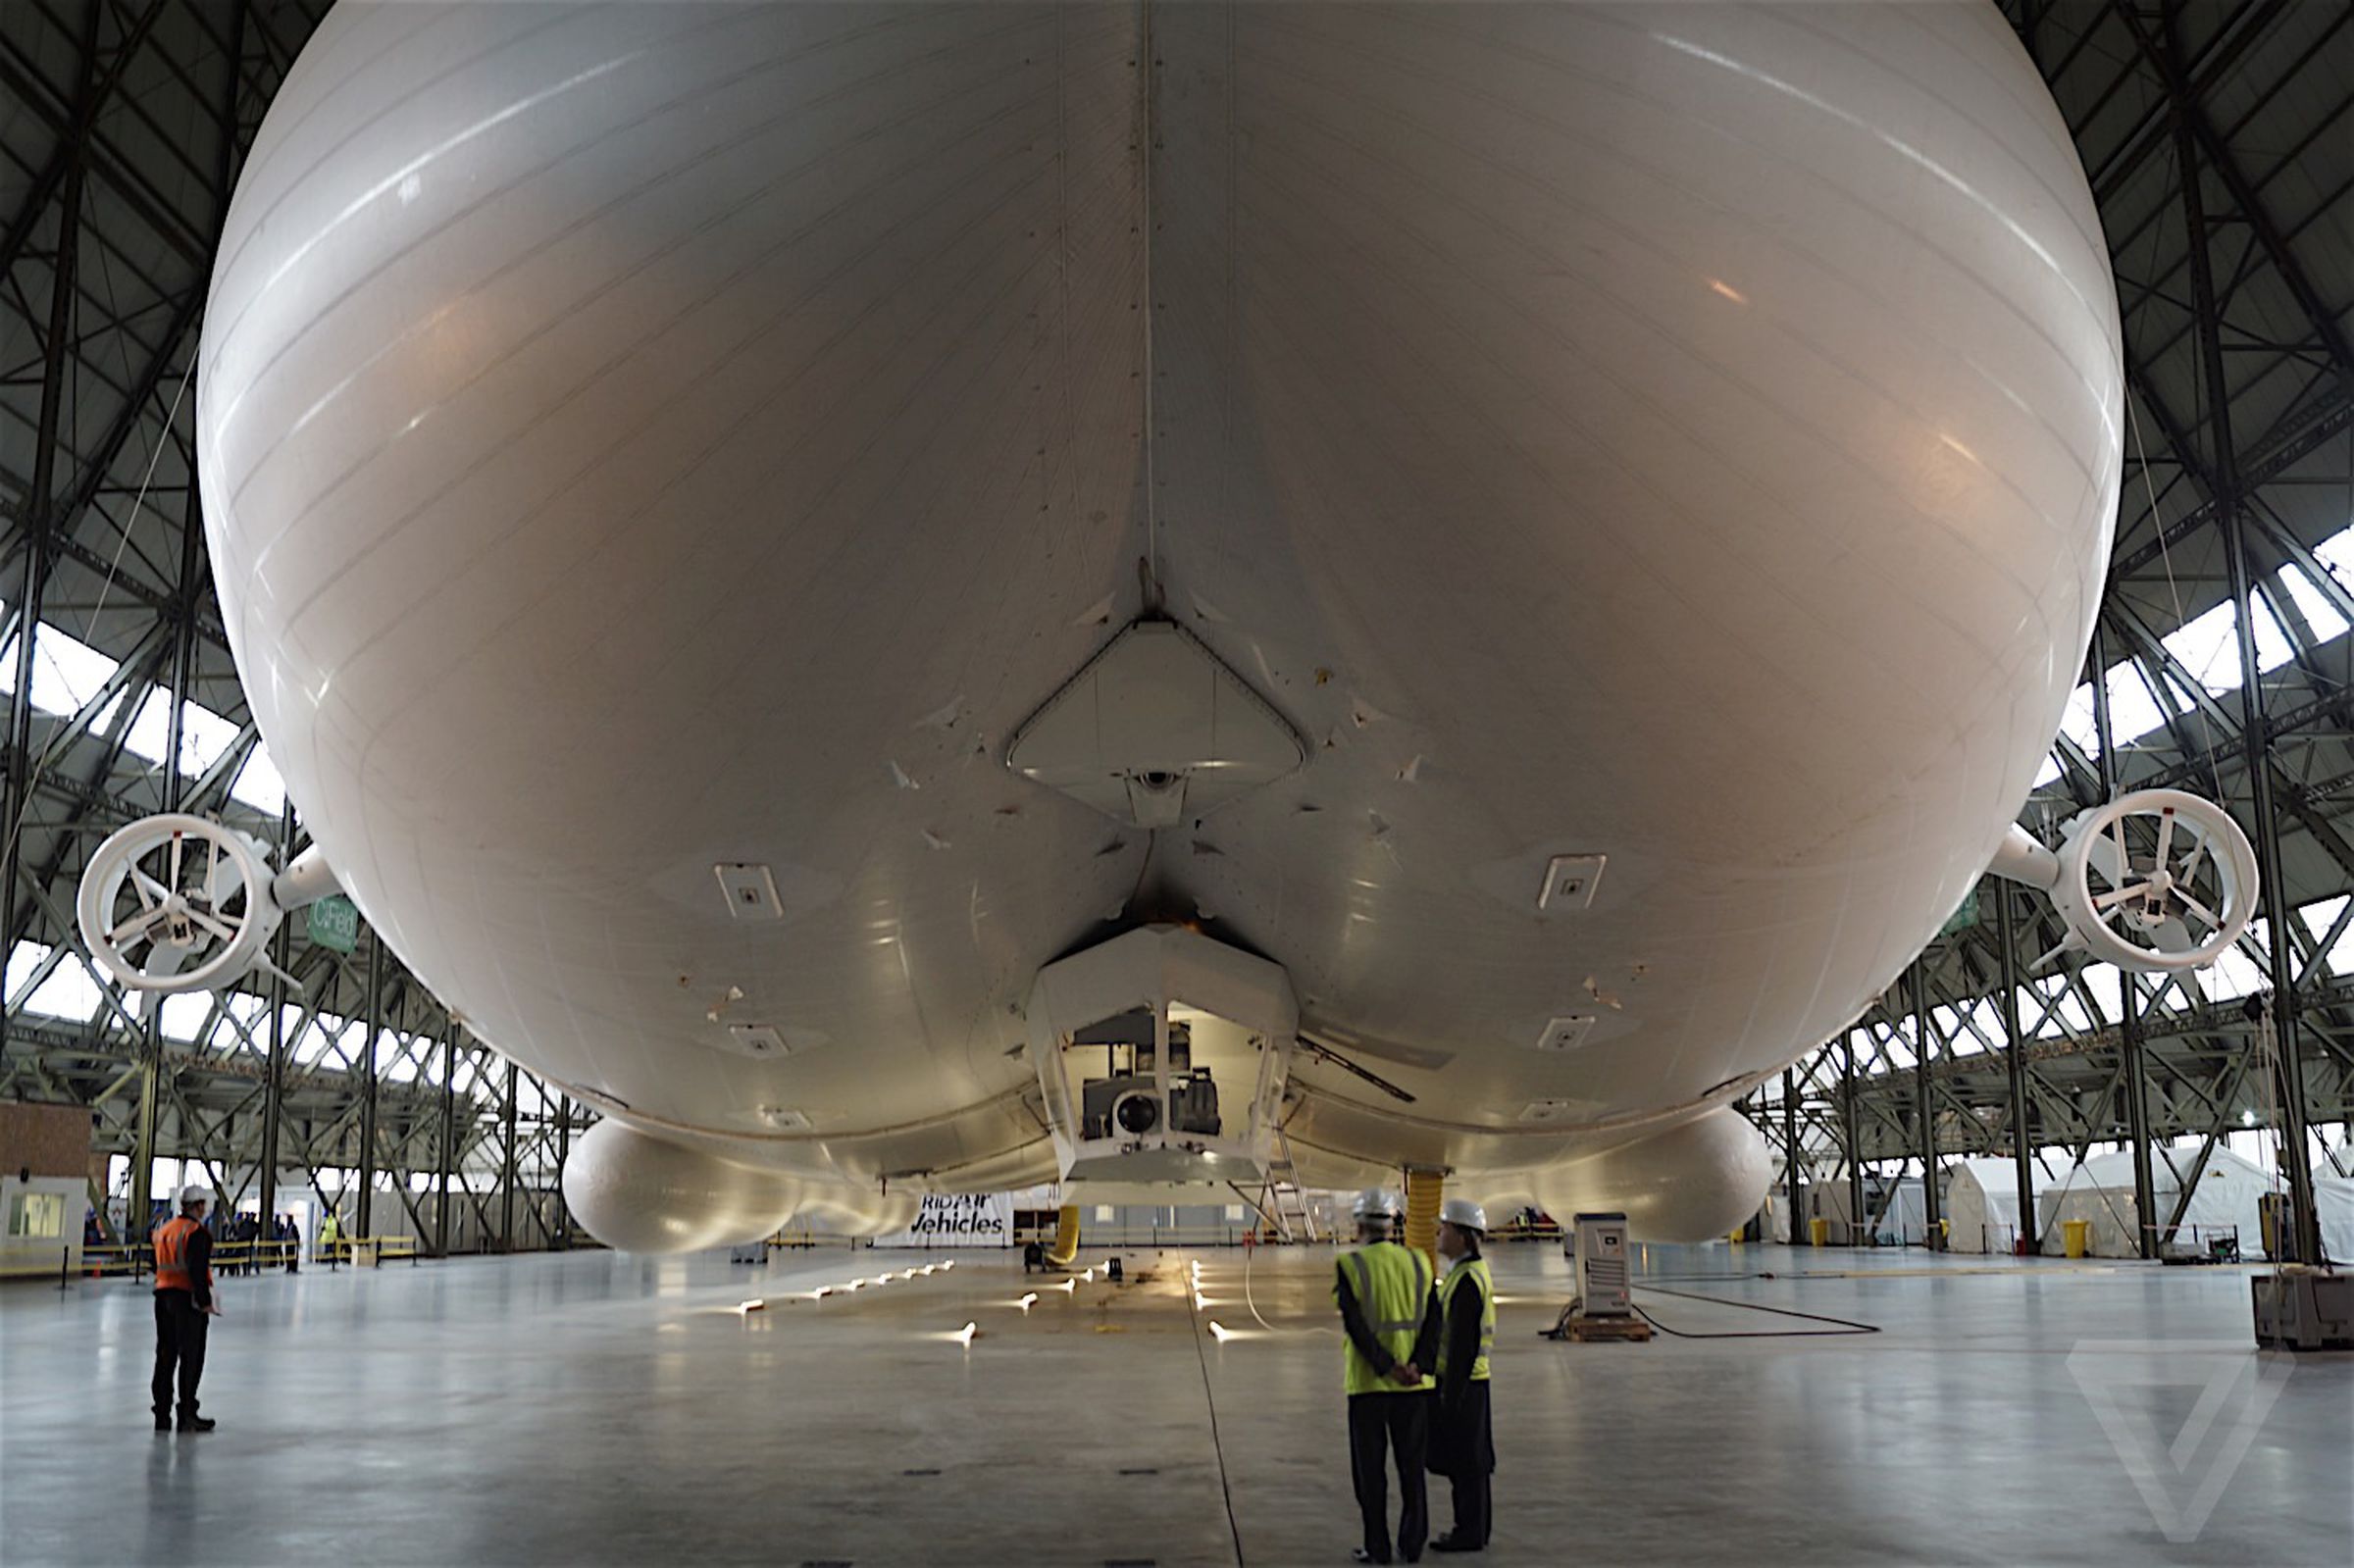 Airlander 10 fully assembled